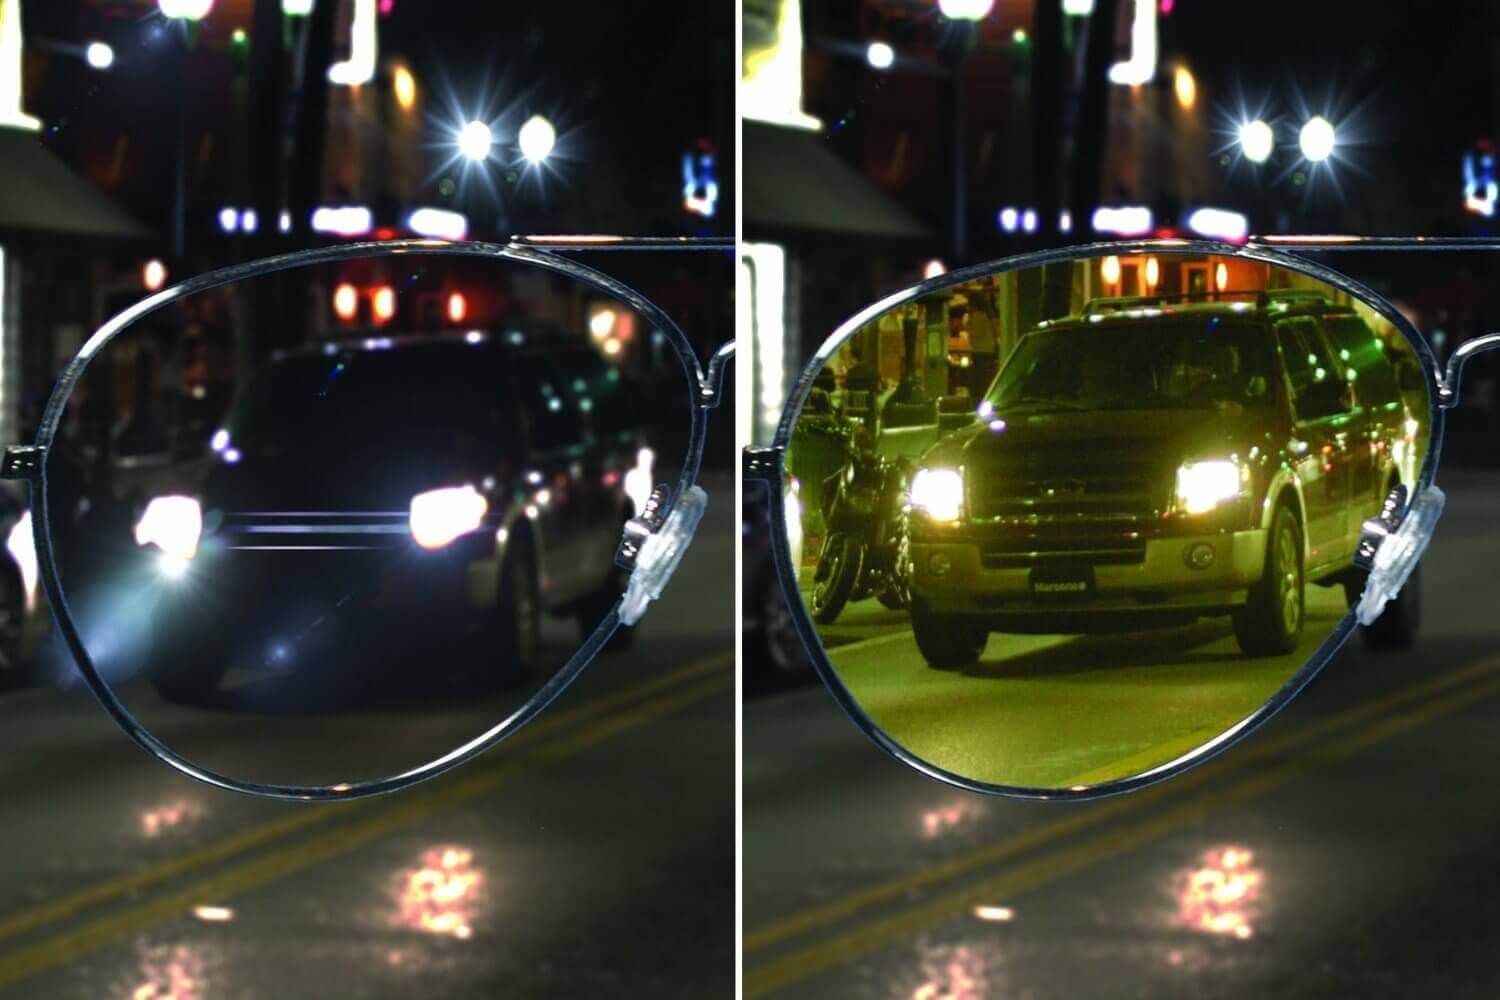 NightSight: Enhancing Clarity and Safety on the Road